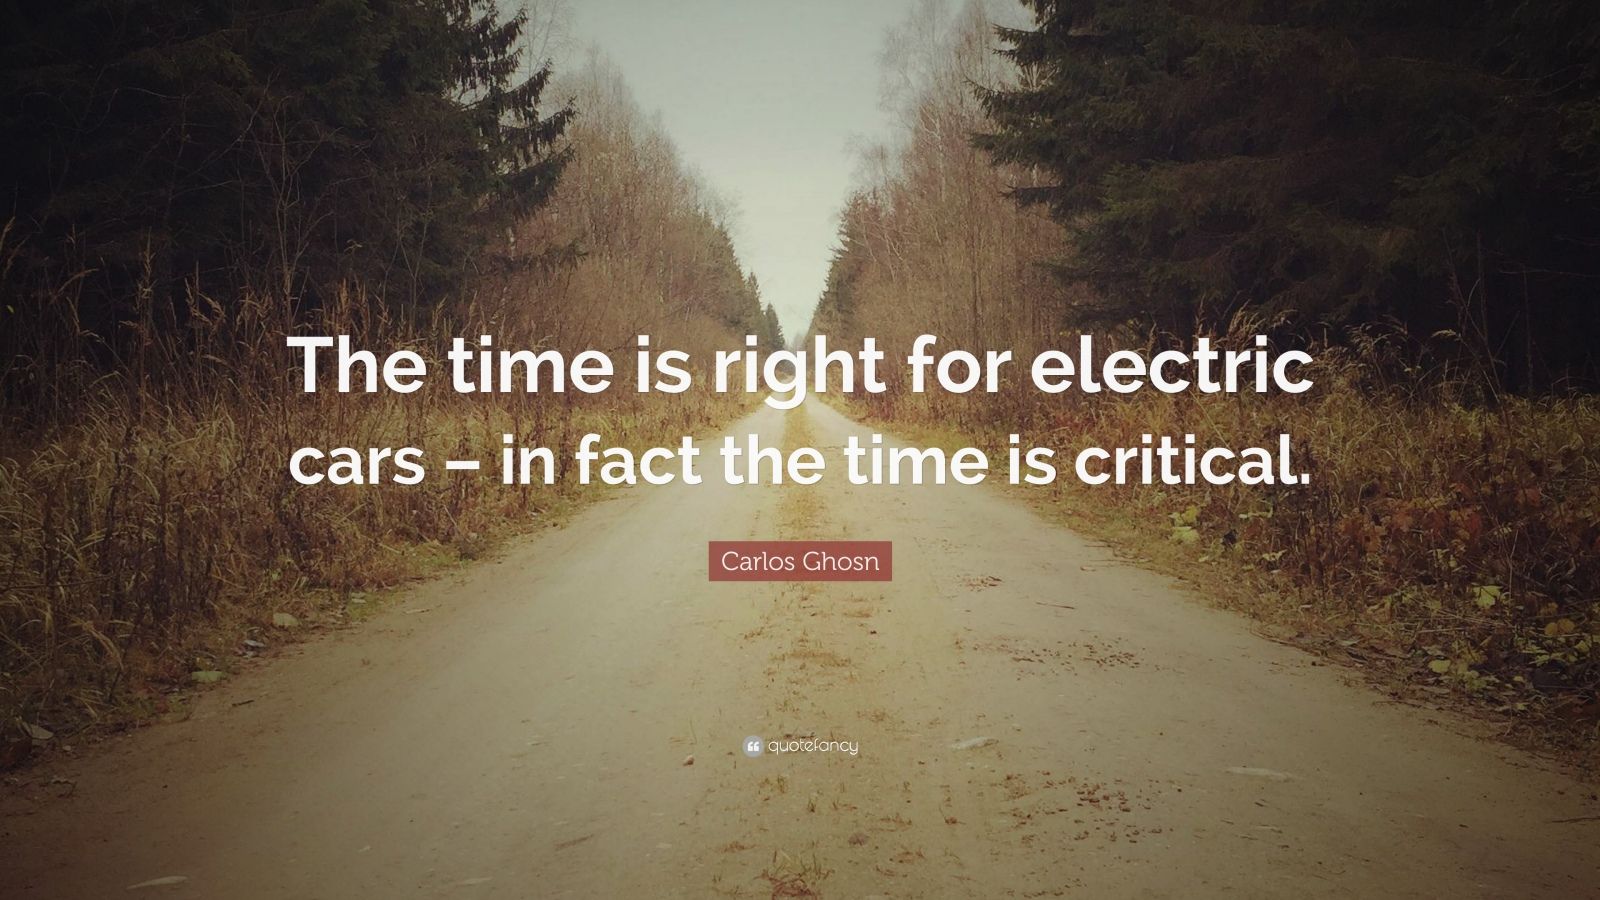 Carlos Ghosn Quote: “The time is right for electric cars – in fact the